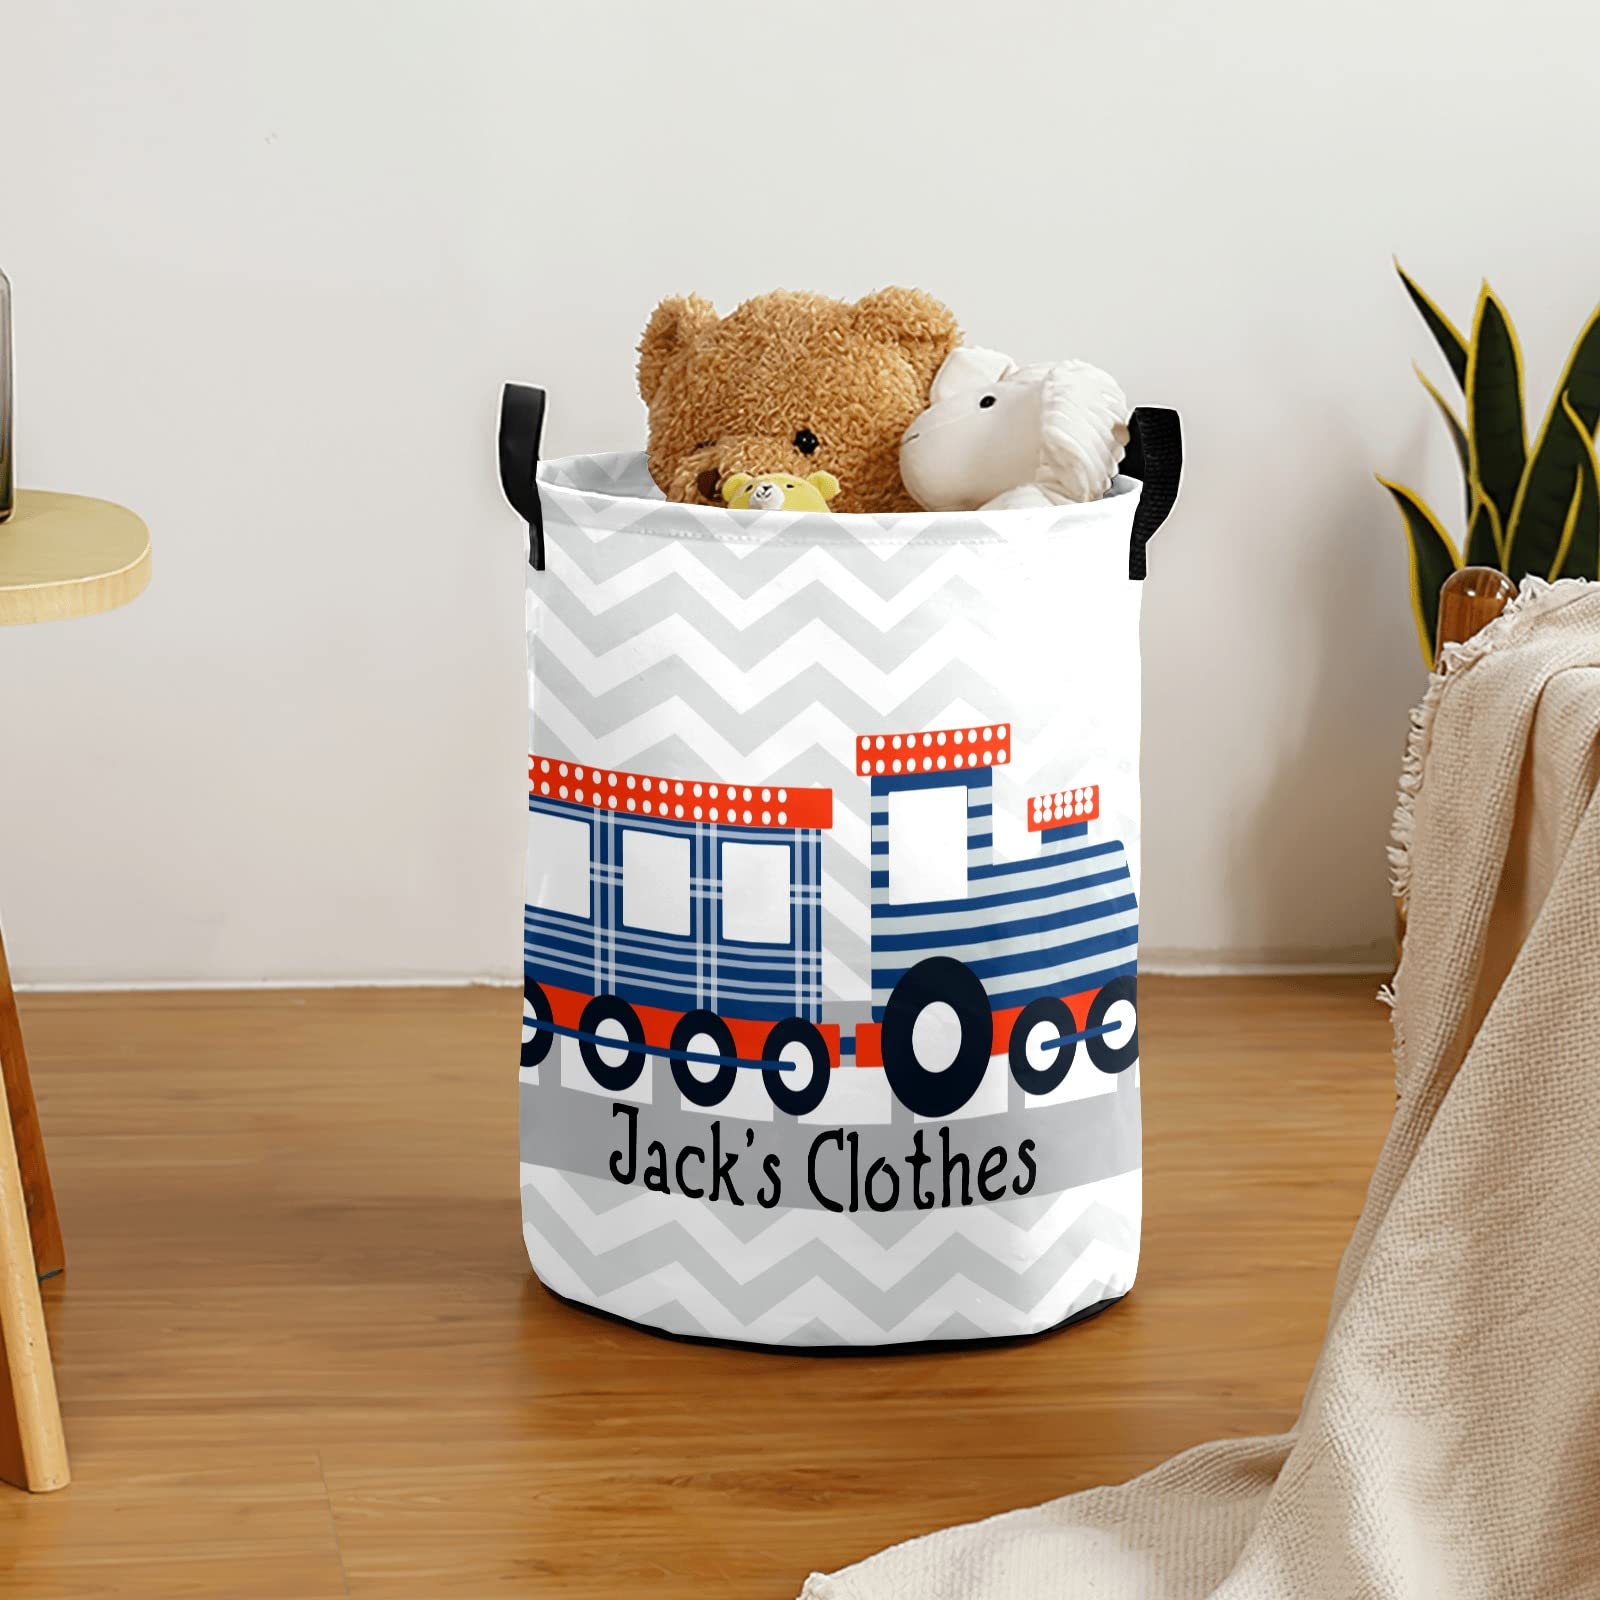 Chevron Train Personalized Freestanding Laundry Hamper, Custom Waterproof Collapsible Drawstring Basket Storage Bins with Handle for Clothes